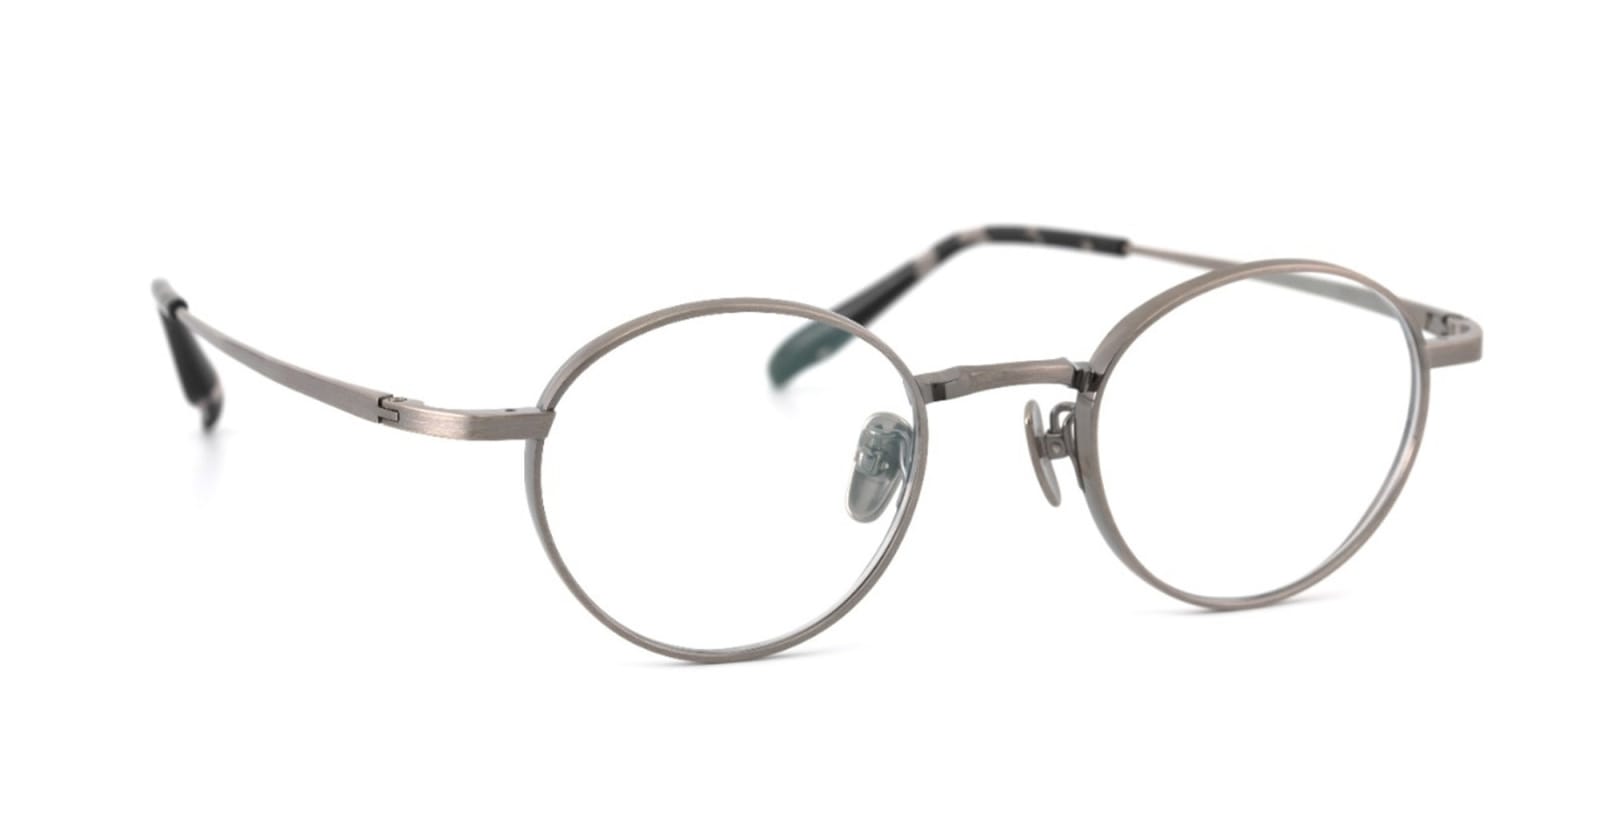 FACTORY900 Titanos X Factory900 Mf-003 - Silver Rx Glasses